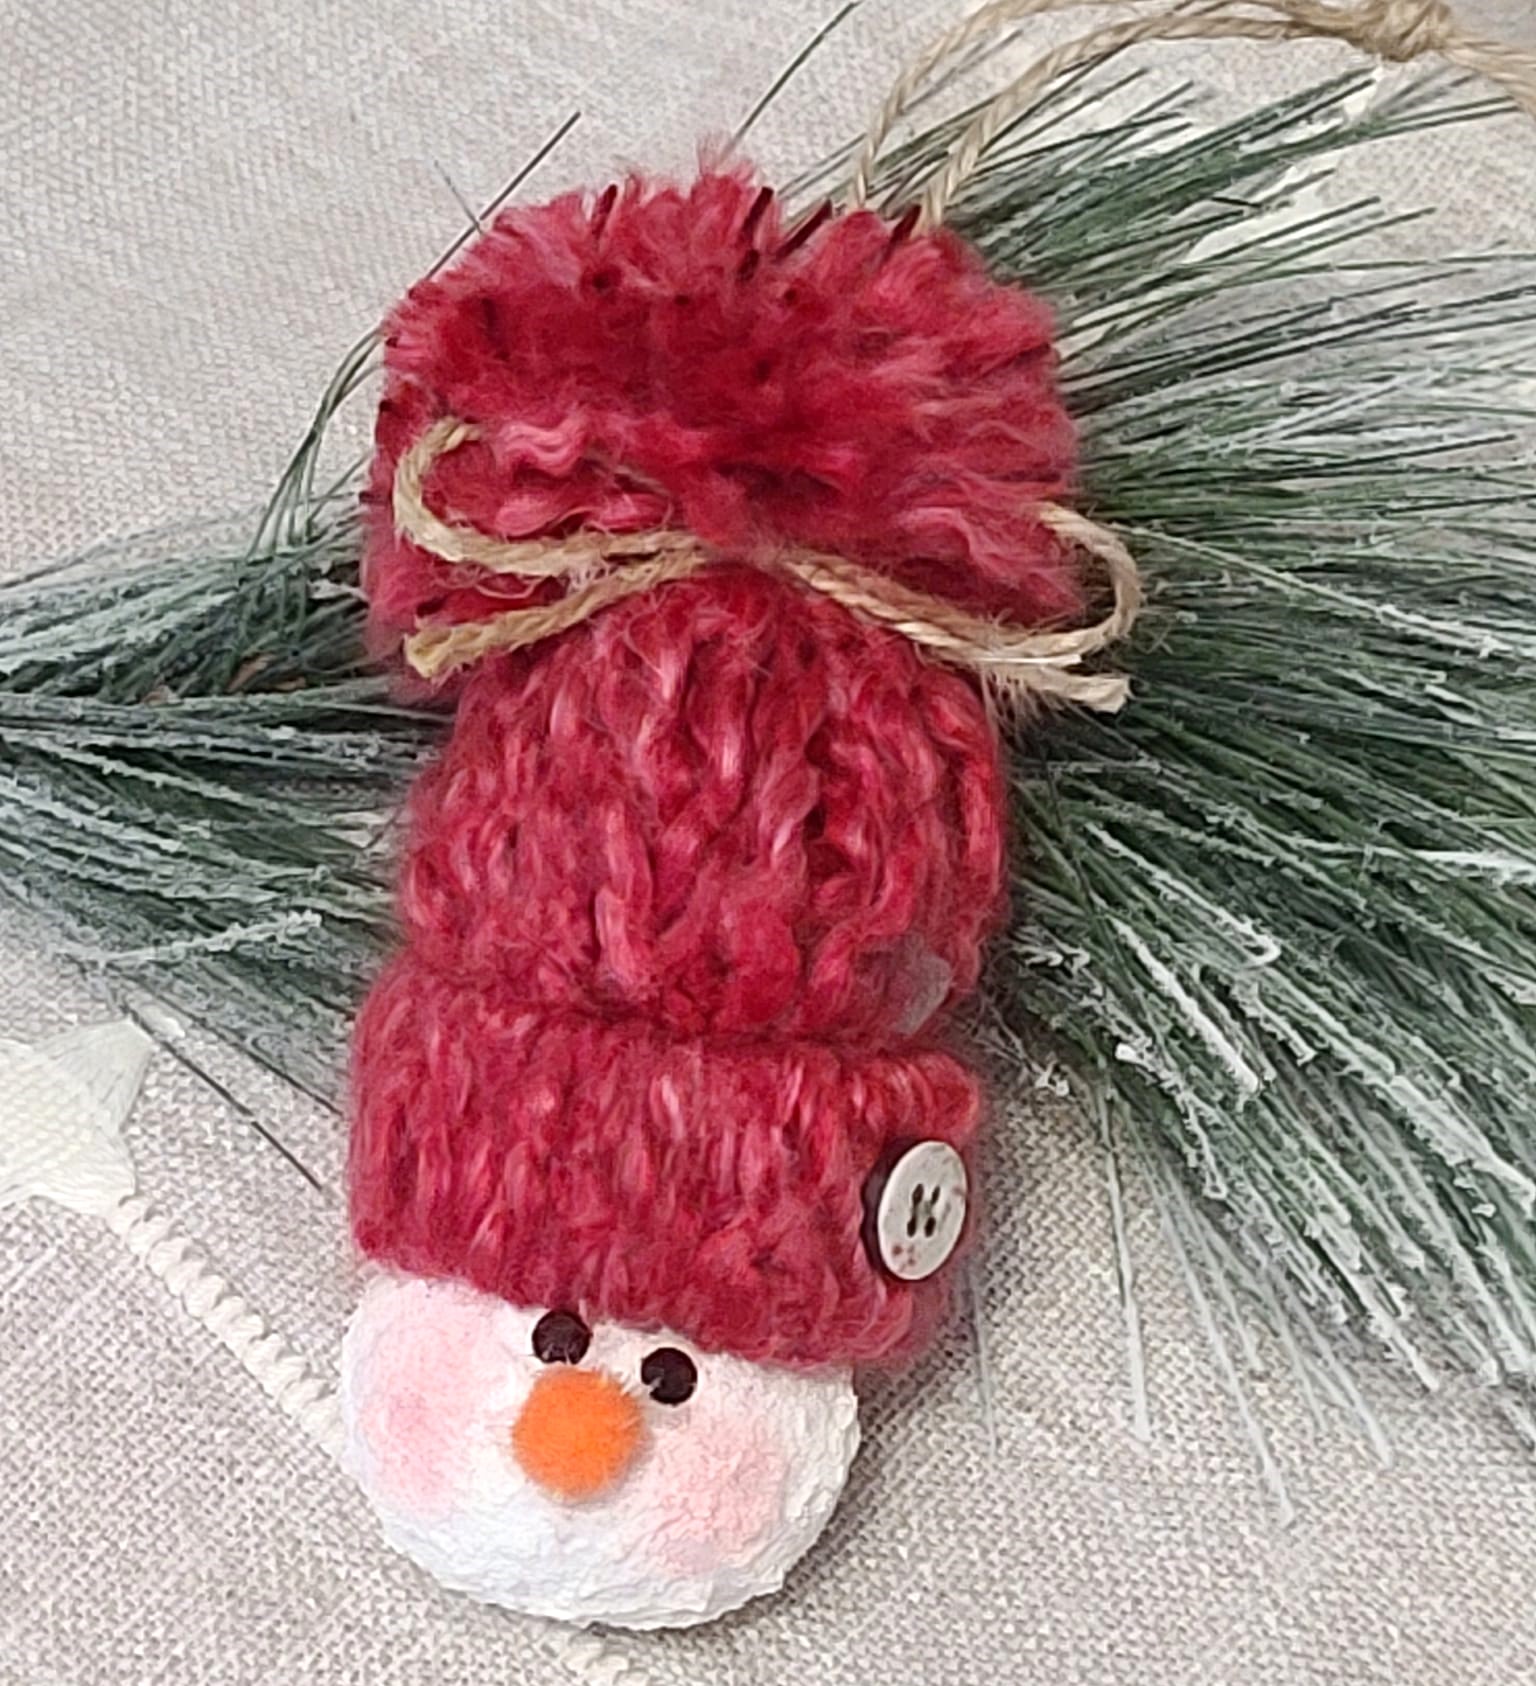 Handpainted ourd snowman ornament with knit hat - rose color